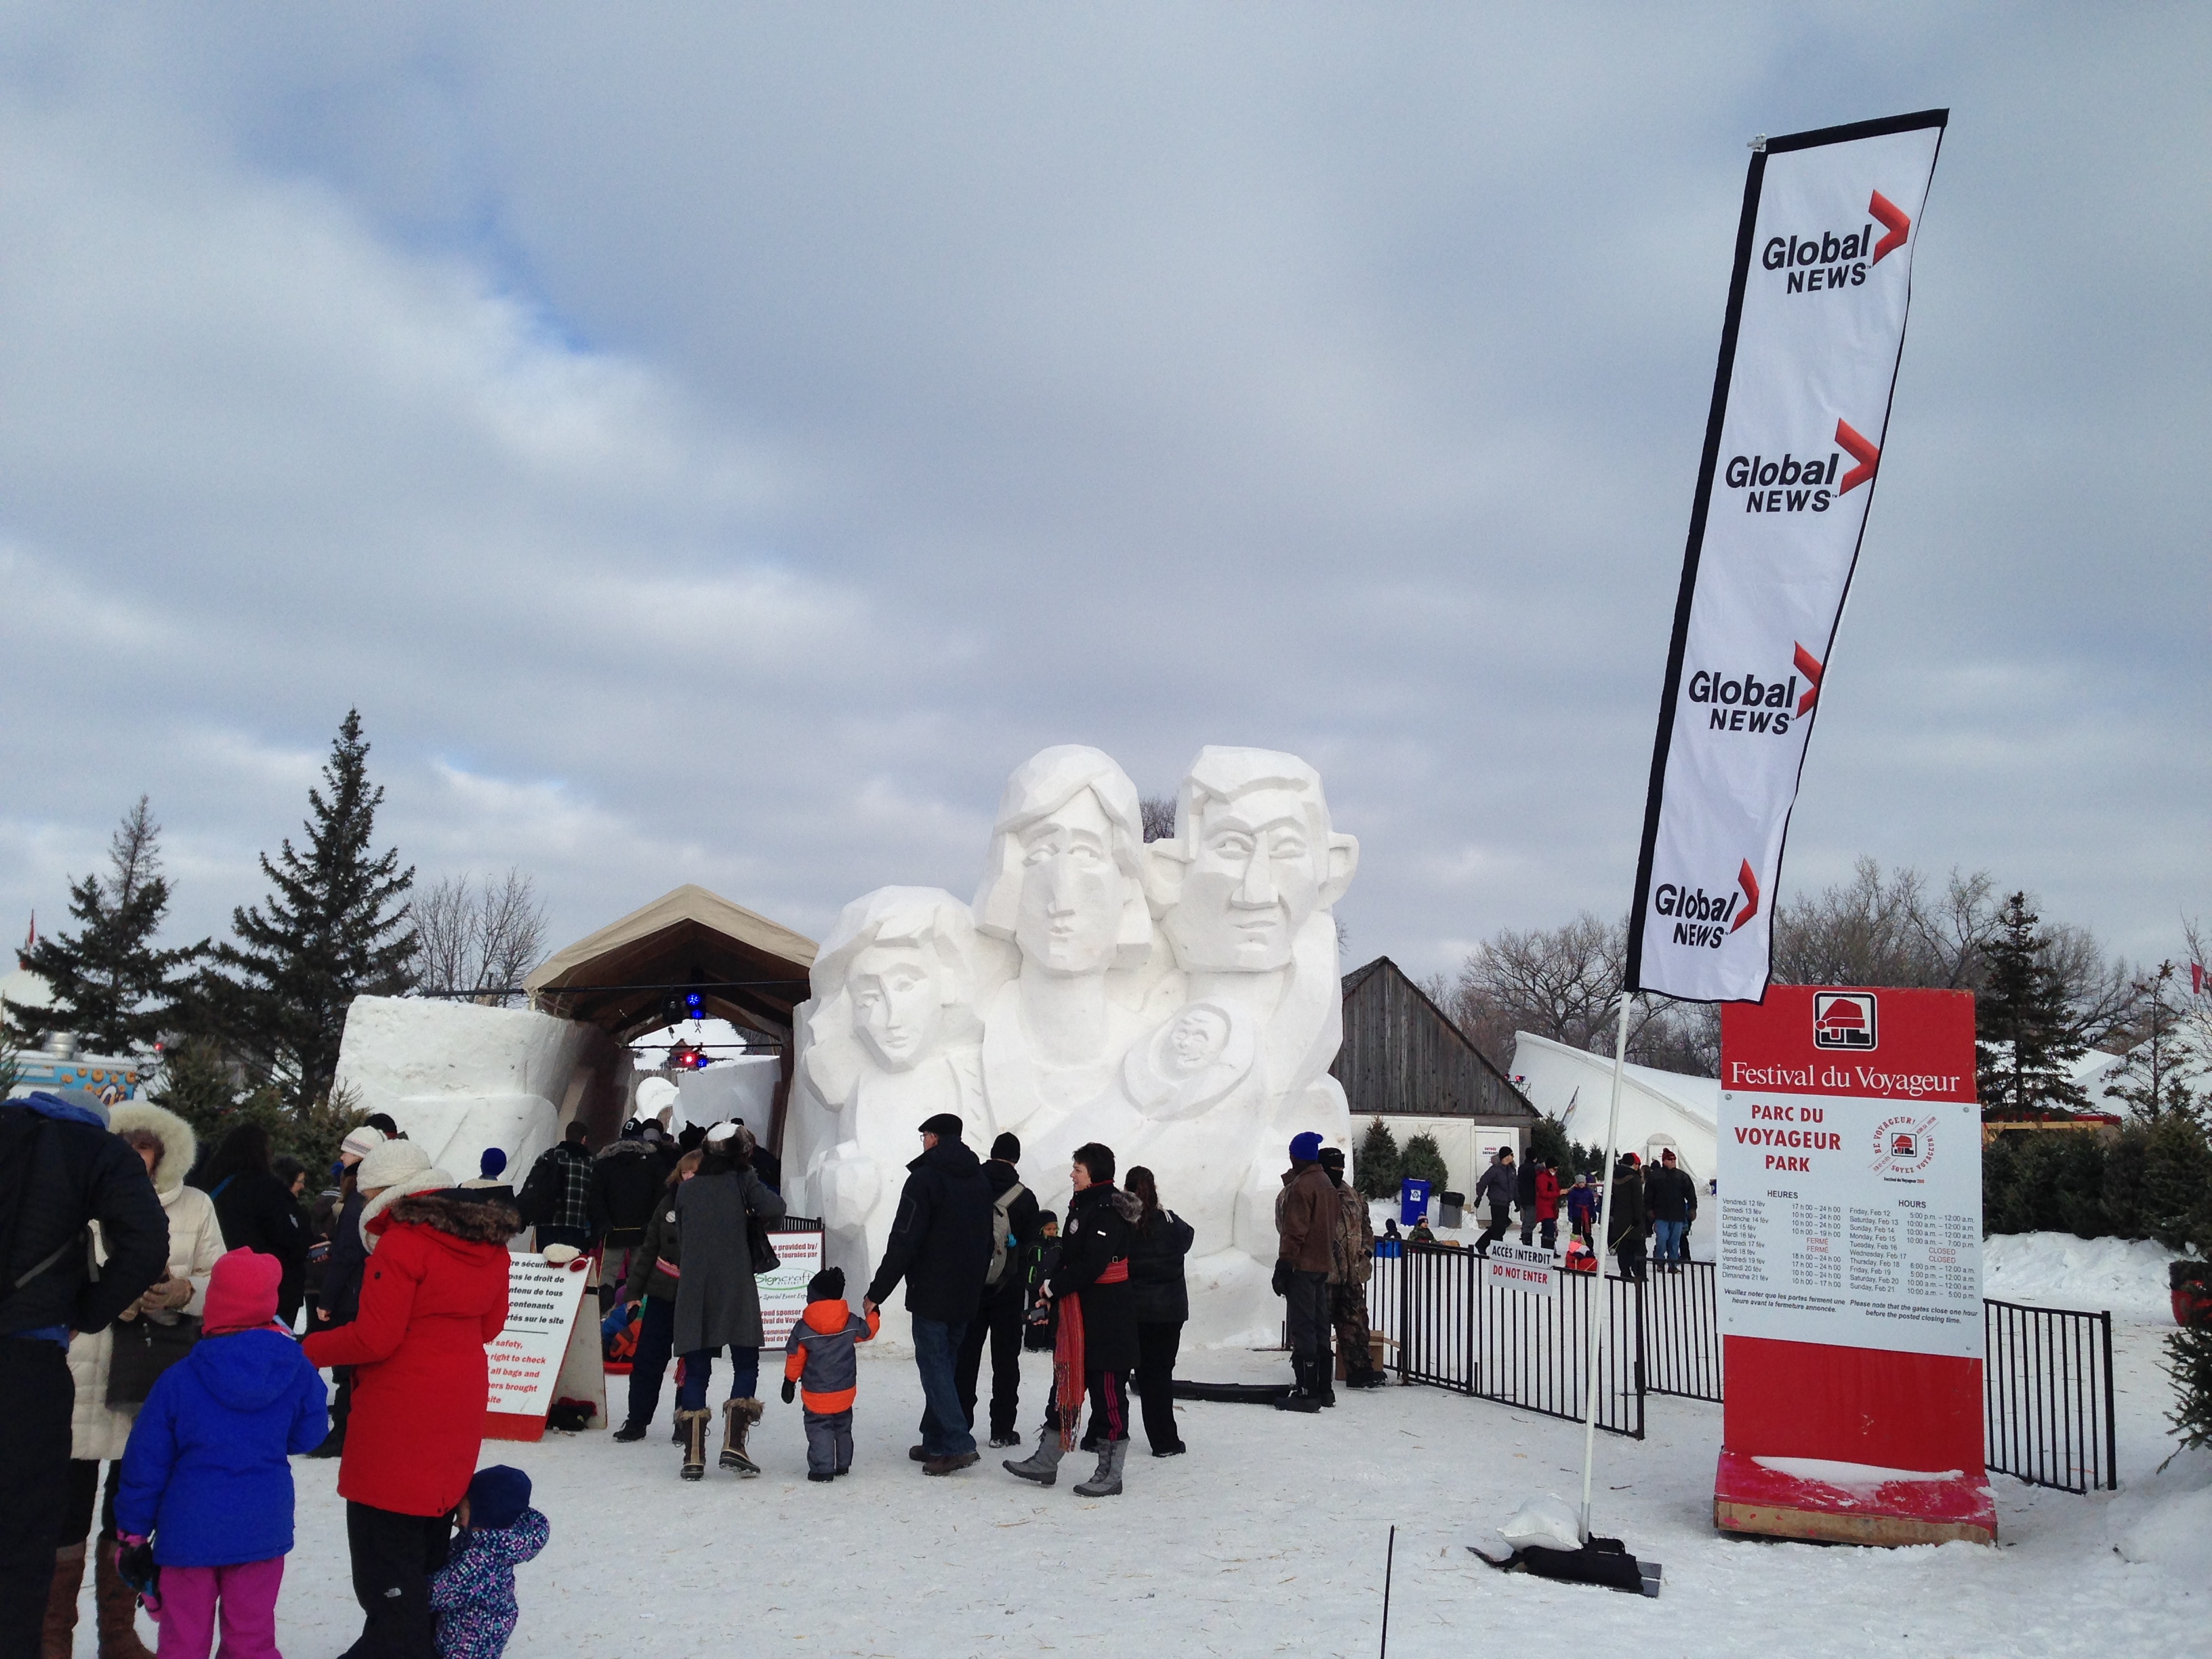 Tickets on sale for 55th edition of Winnipeg’s Festival du Voyageur